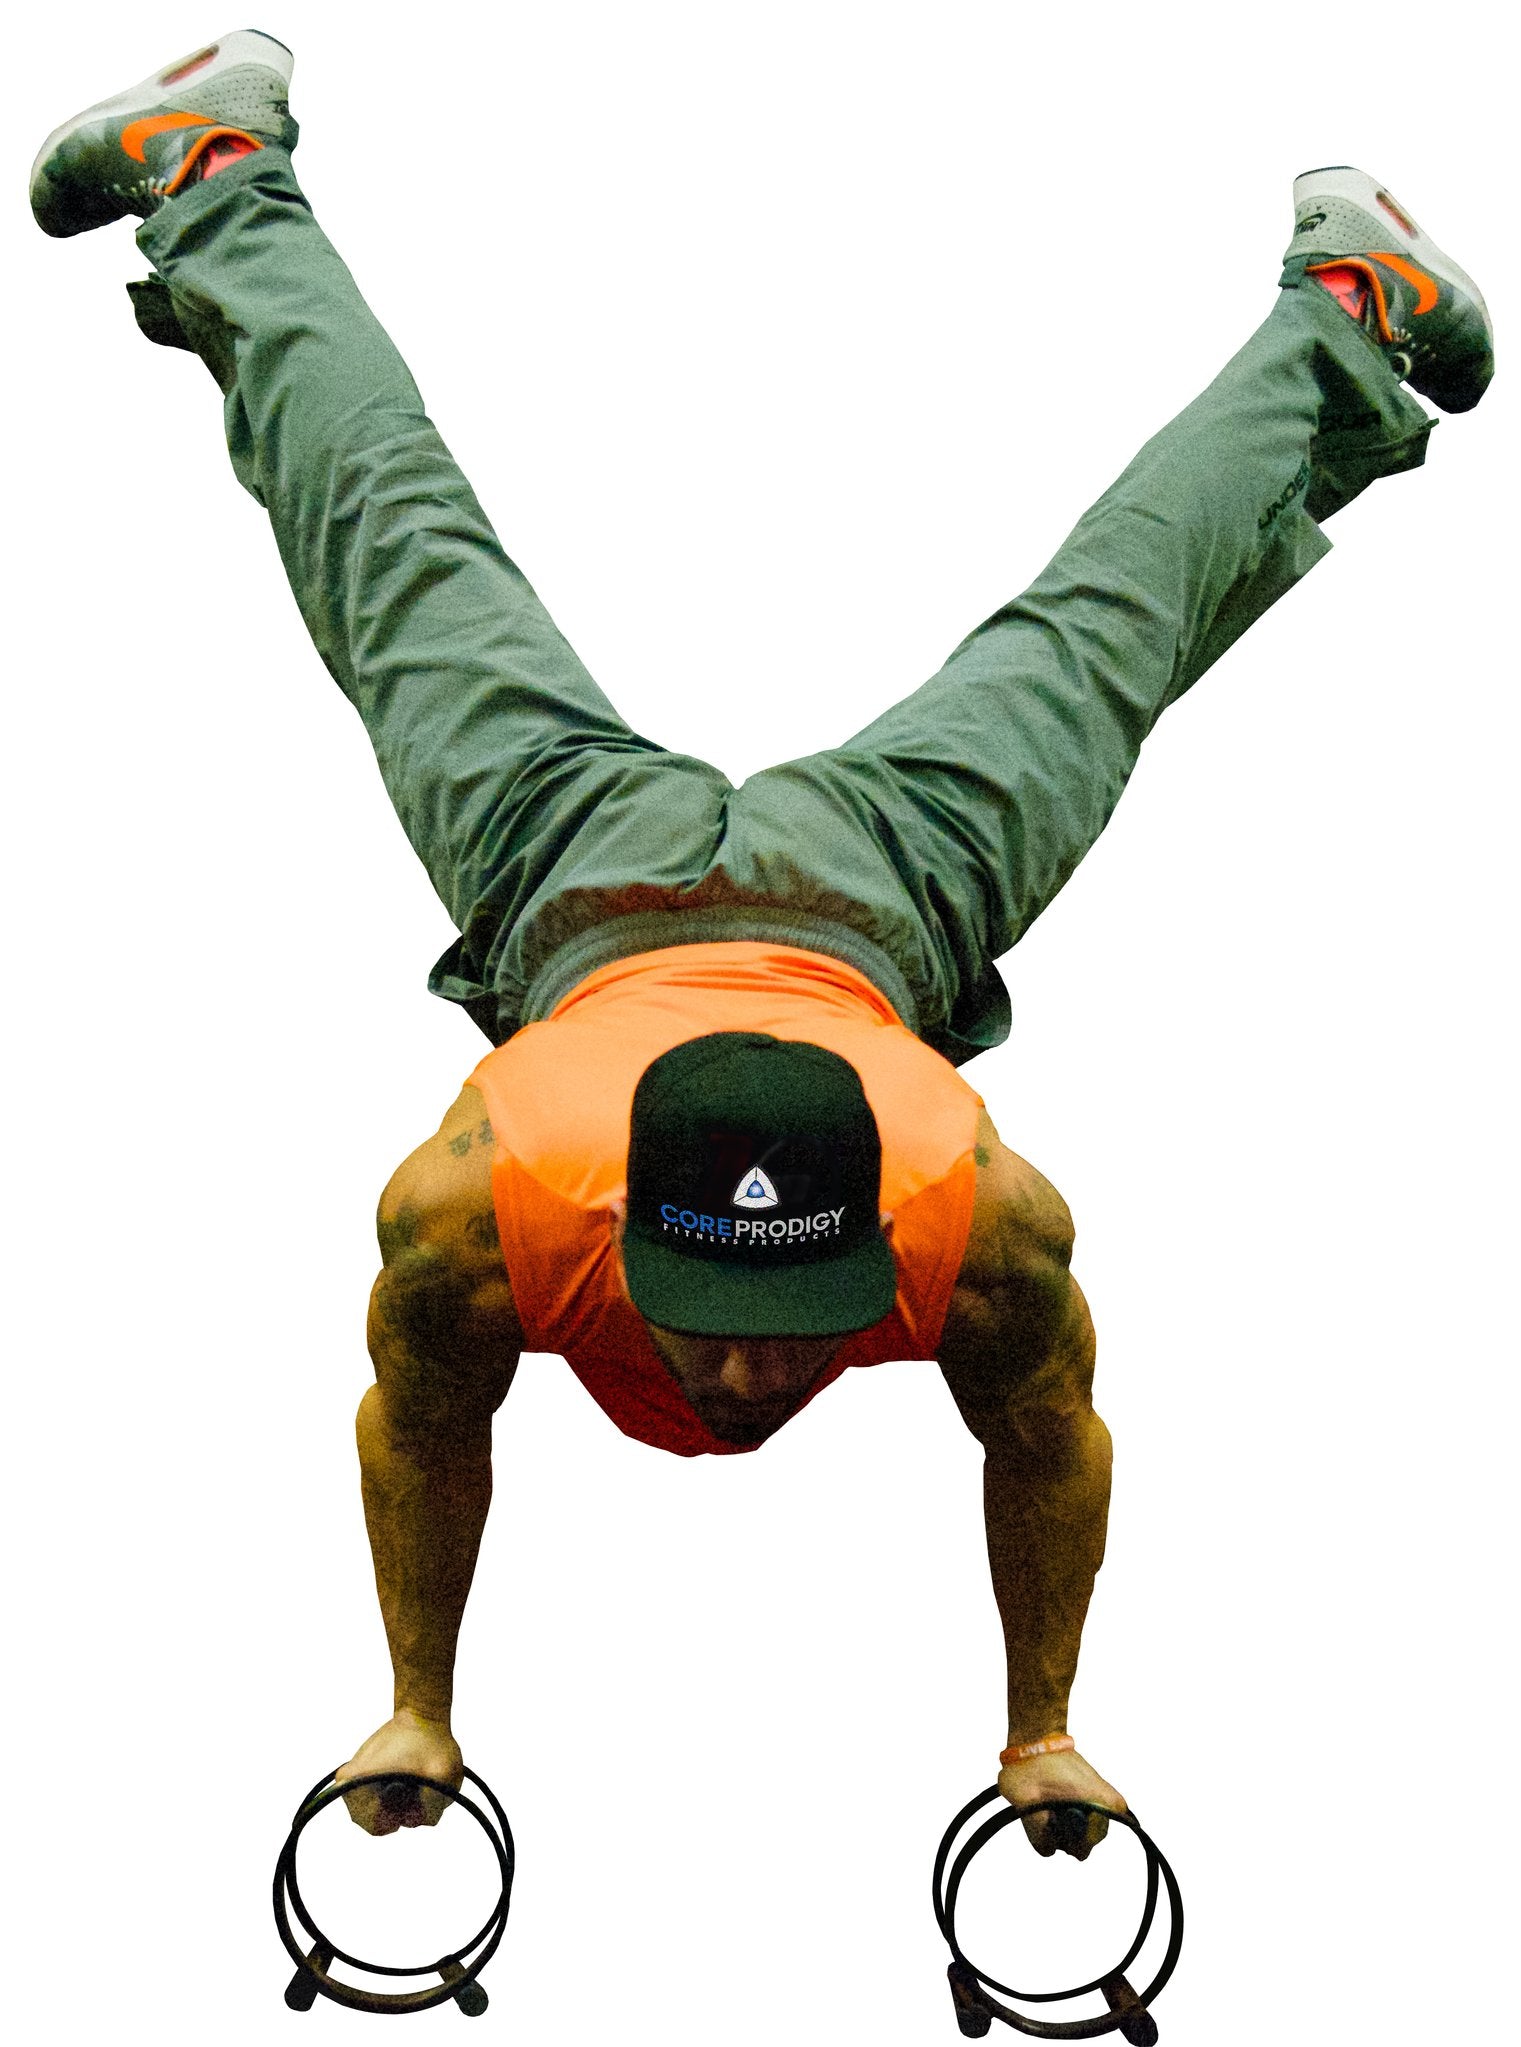 P-Fit Handstand by Core Prodigy